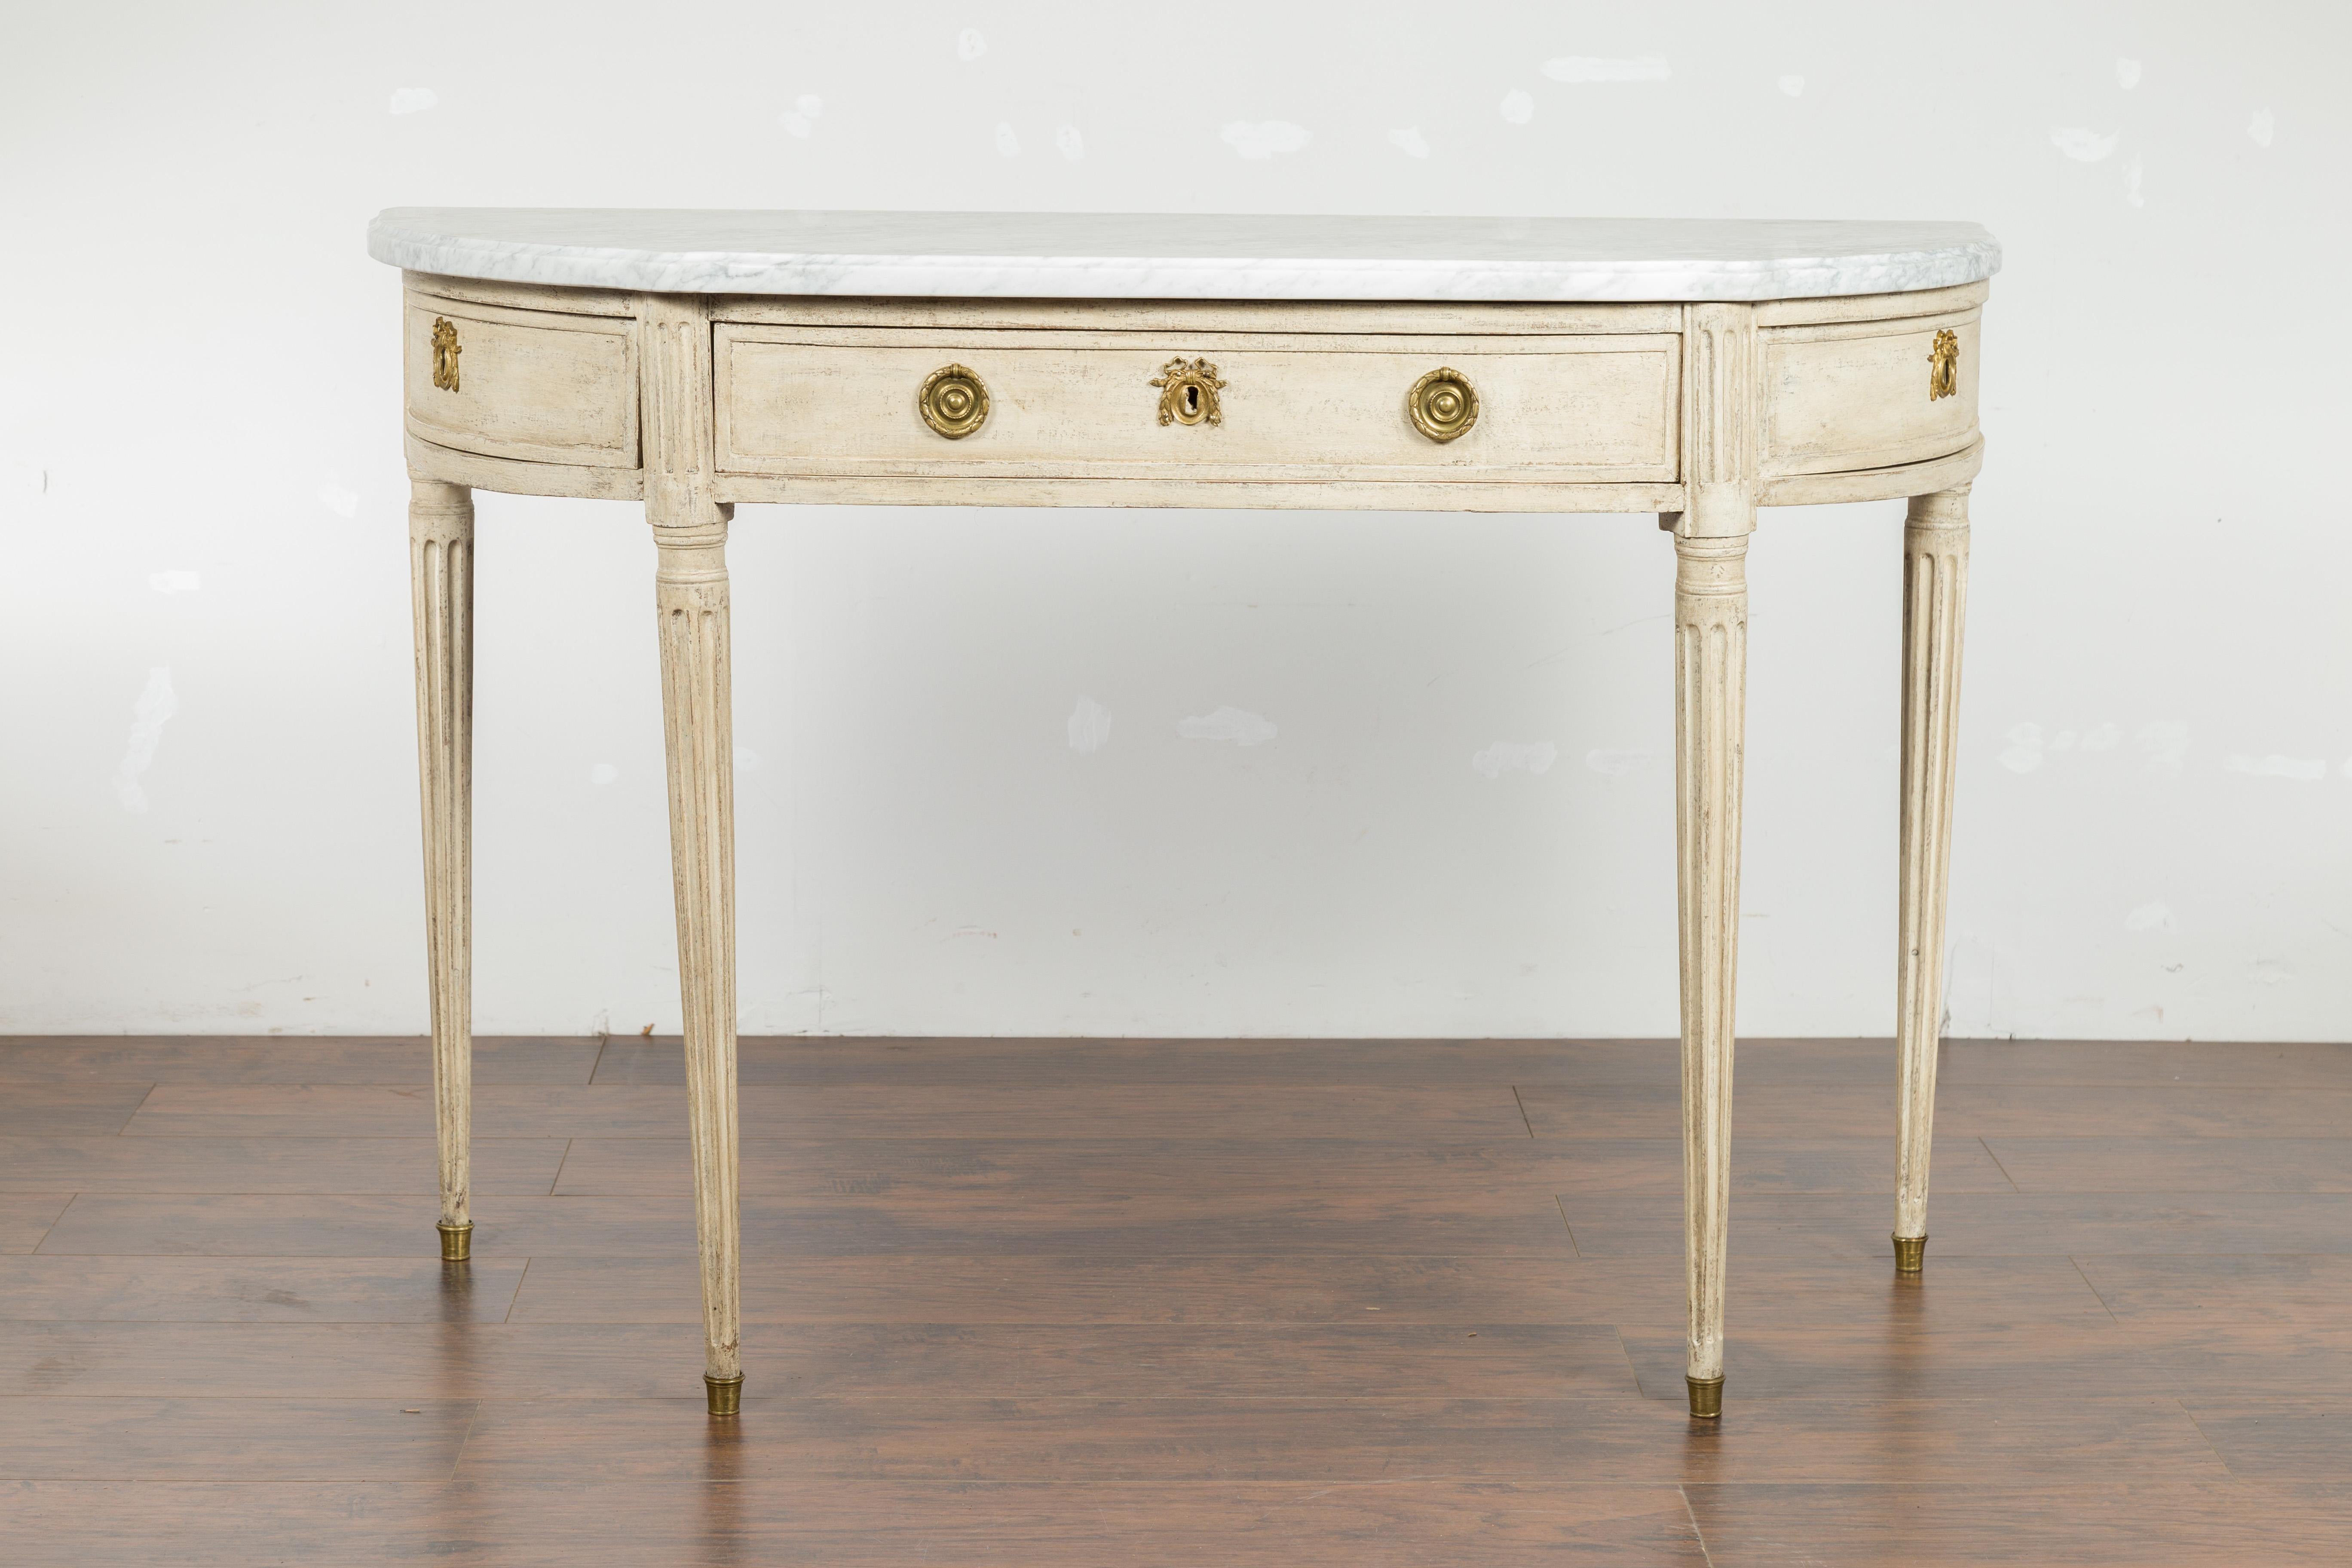 Pair of French 19th Century Neoclassical Style Demilune Tables with Marble Tops For Sale 7